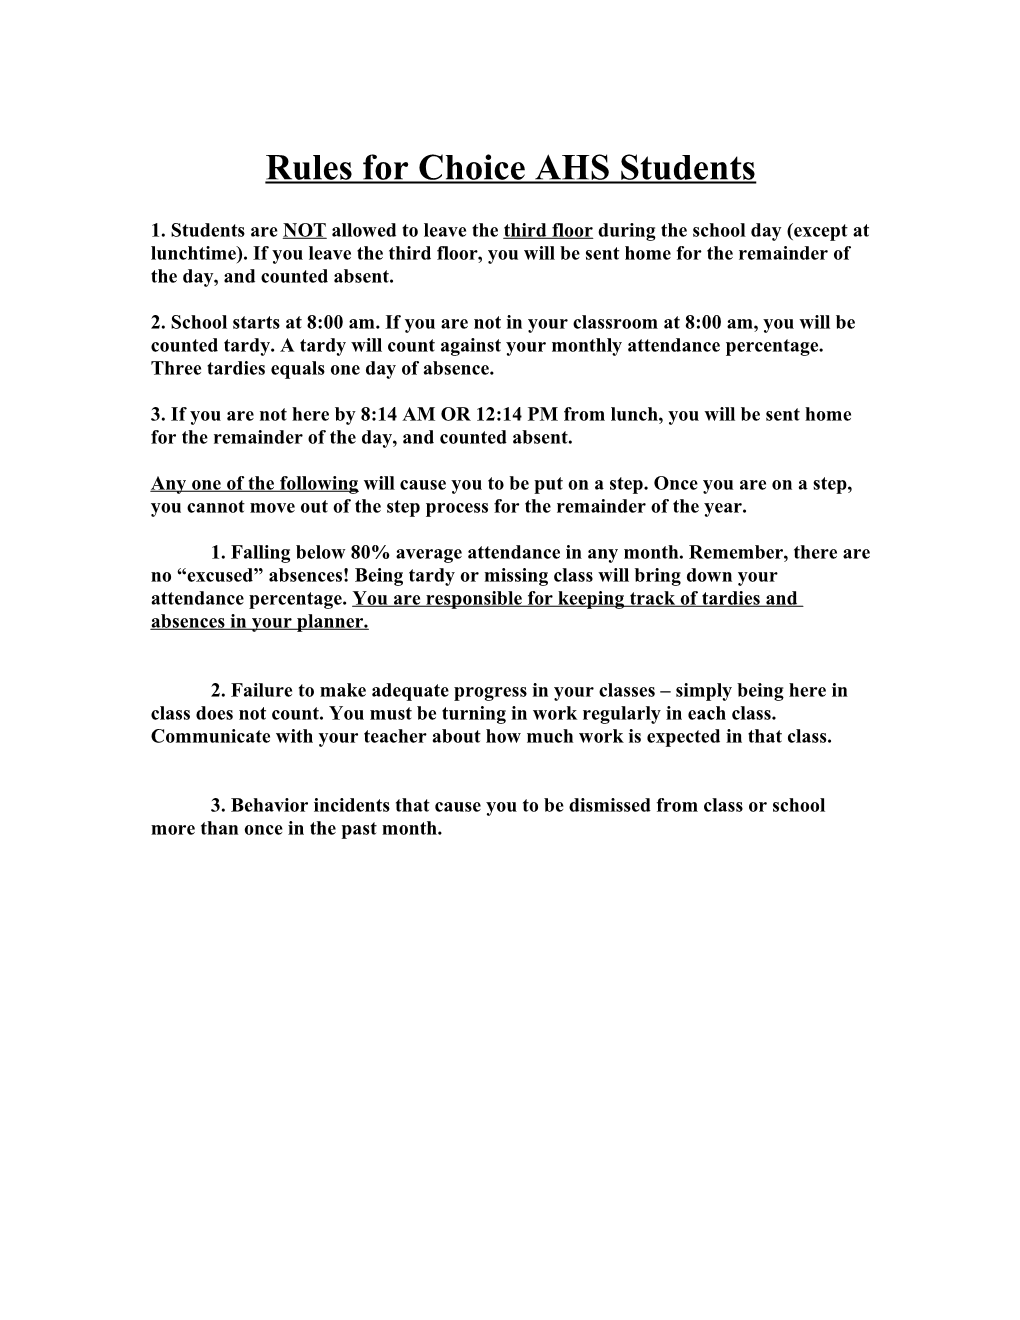 Rules for Choice AHS Students